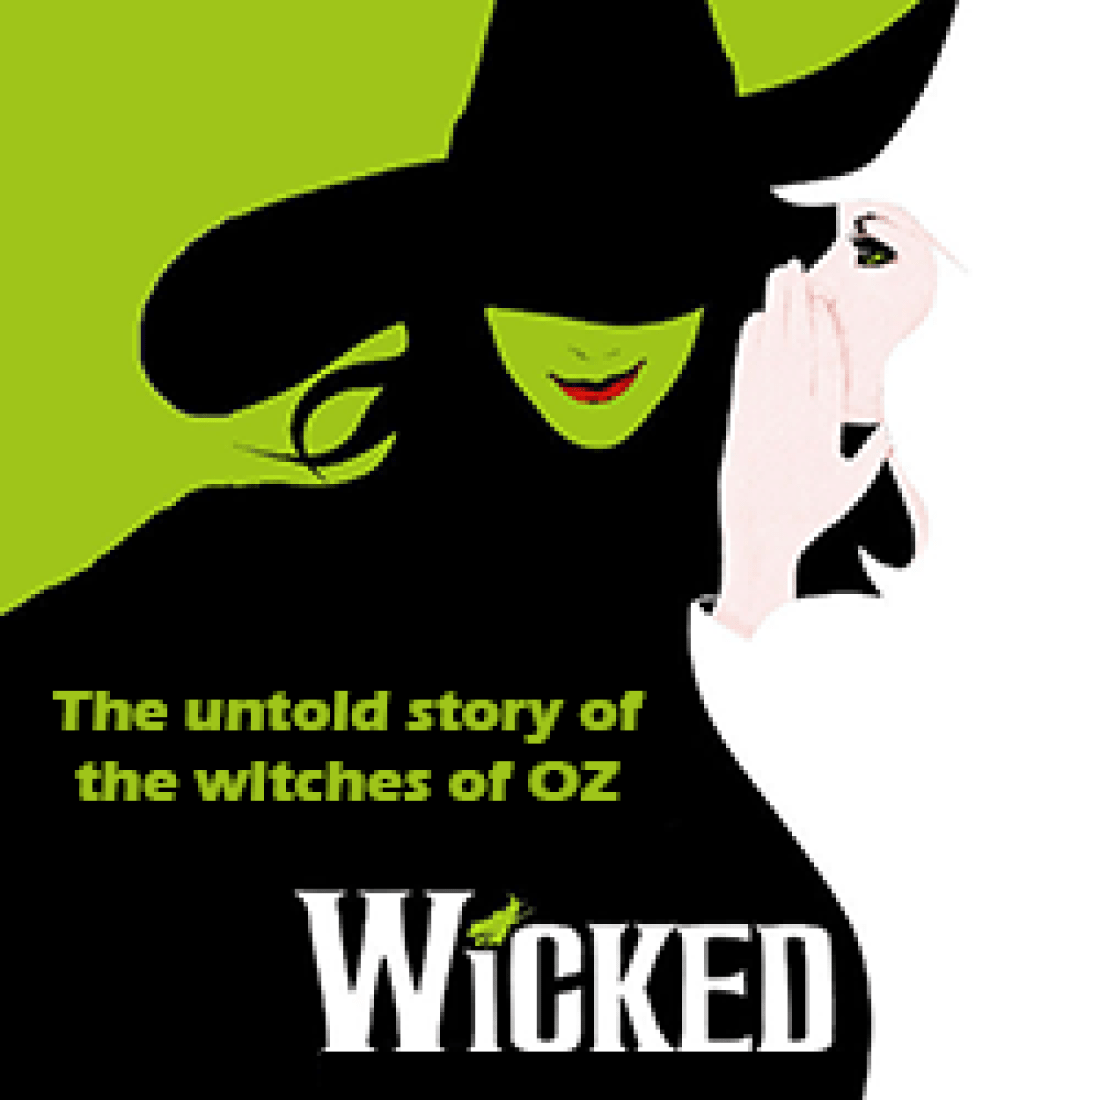 Text "The untold story of the witches of Oz ... Wicked" with graphic of two witches